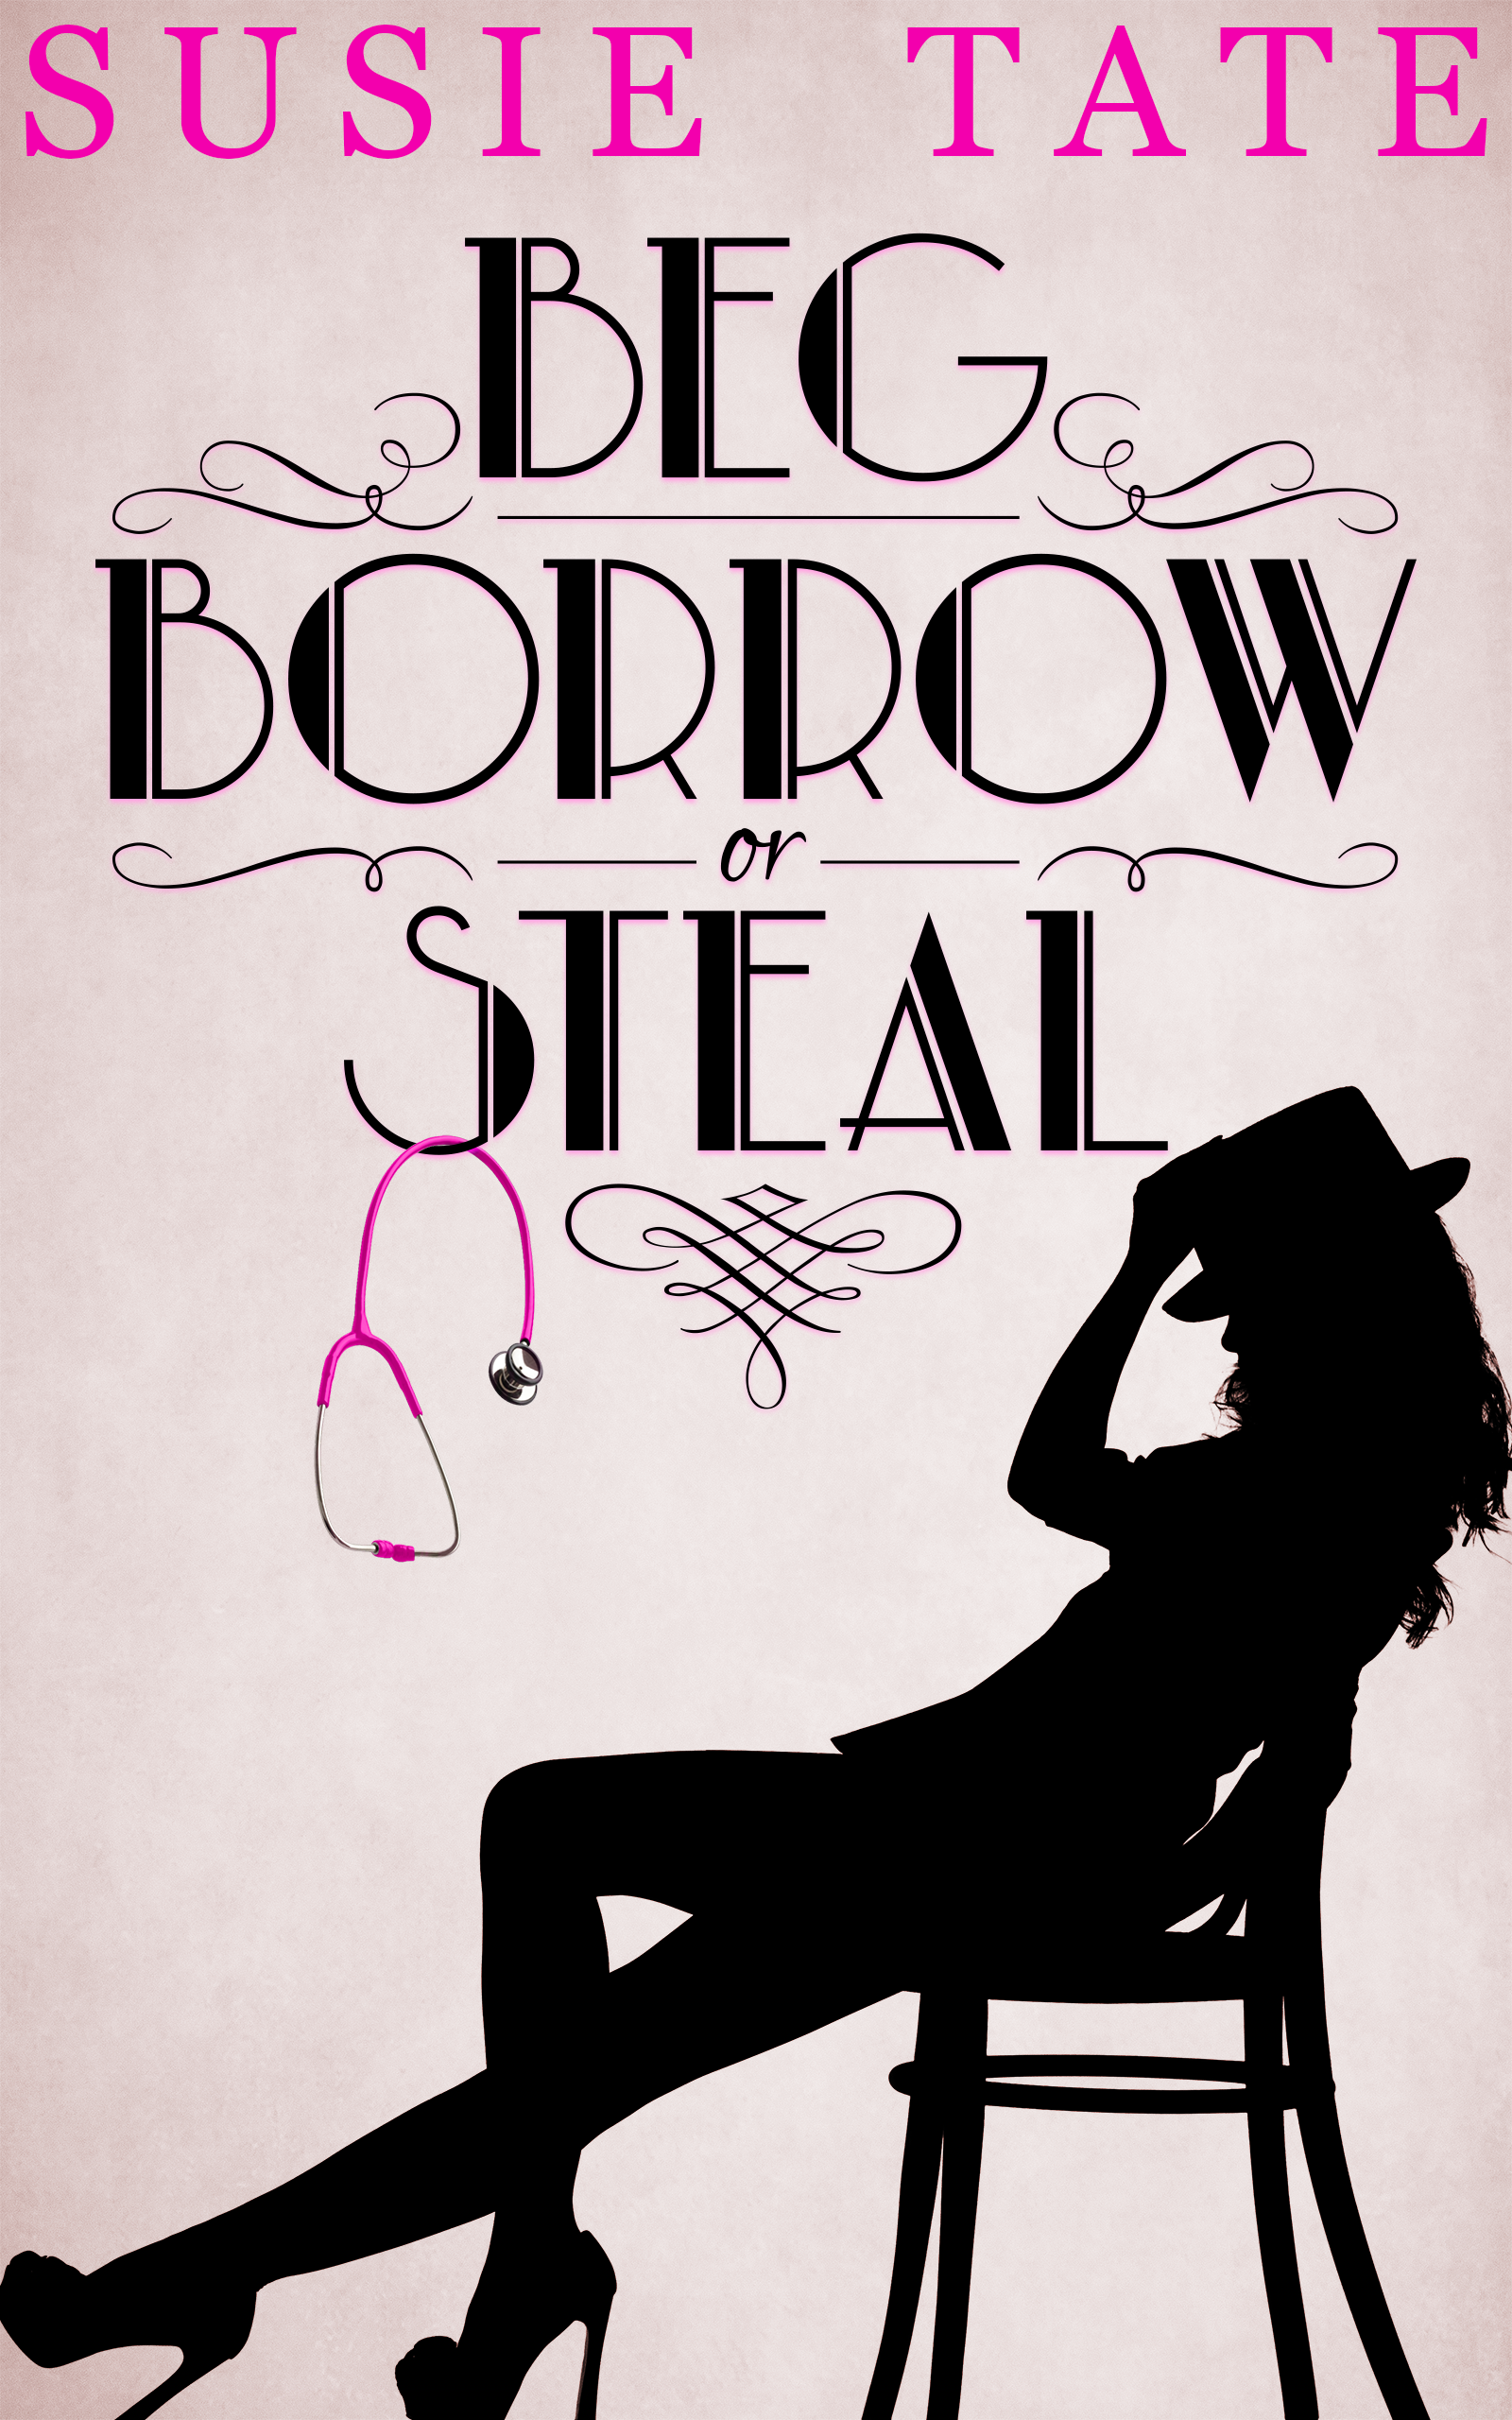 FREE: Beg, Borrow or Steal by Susie Tate